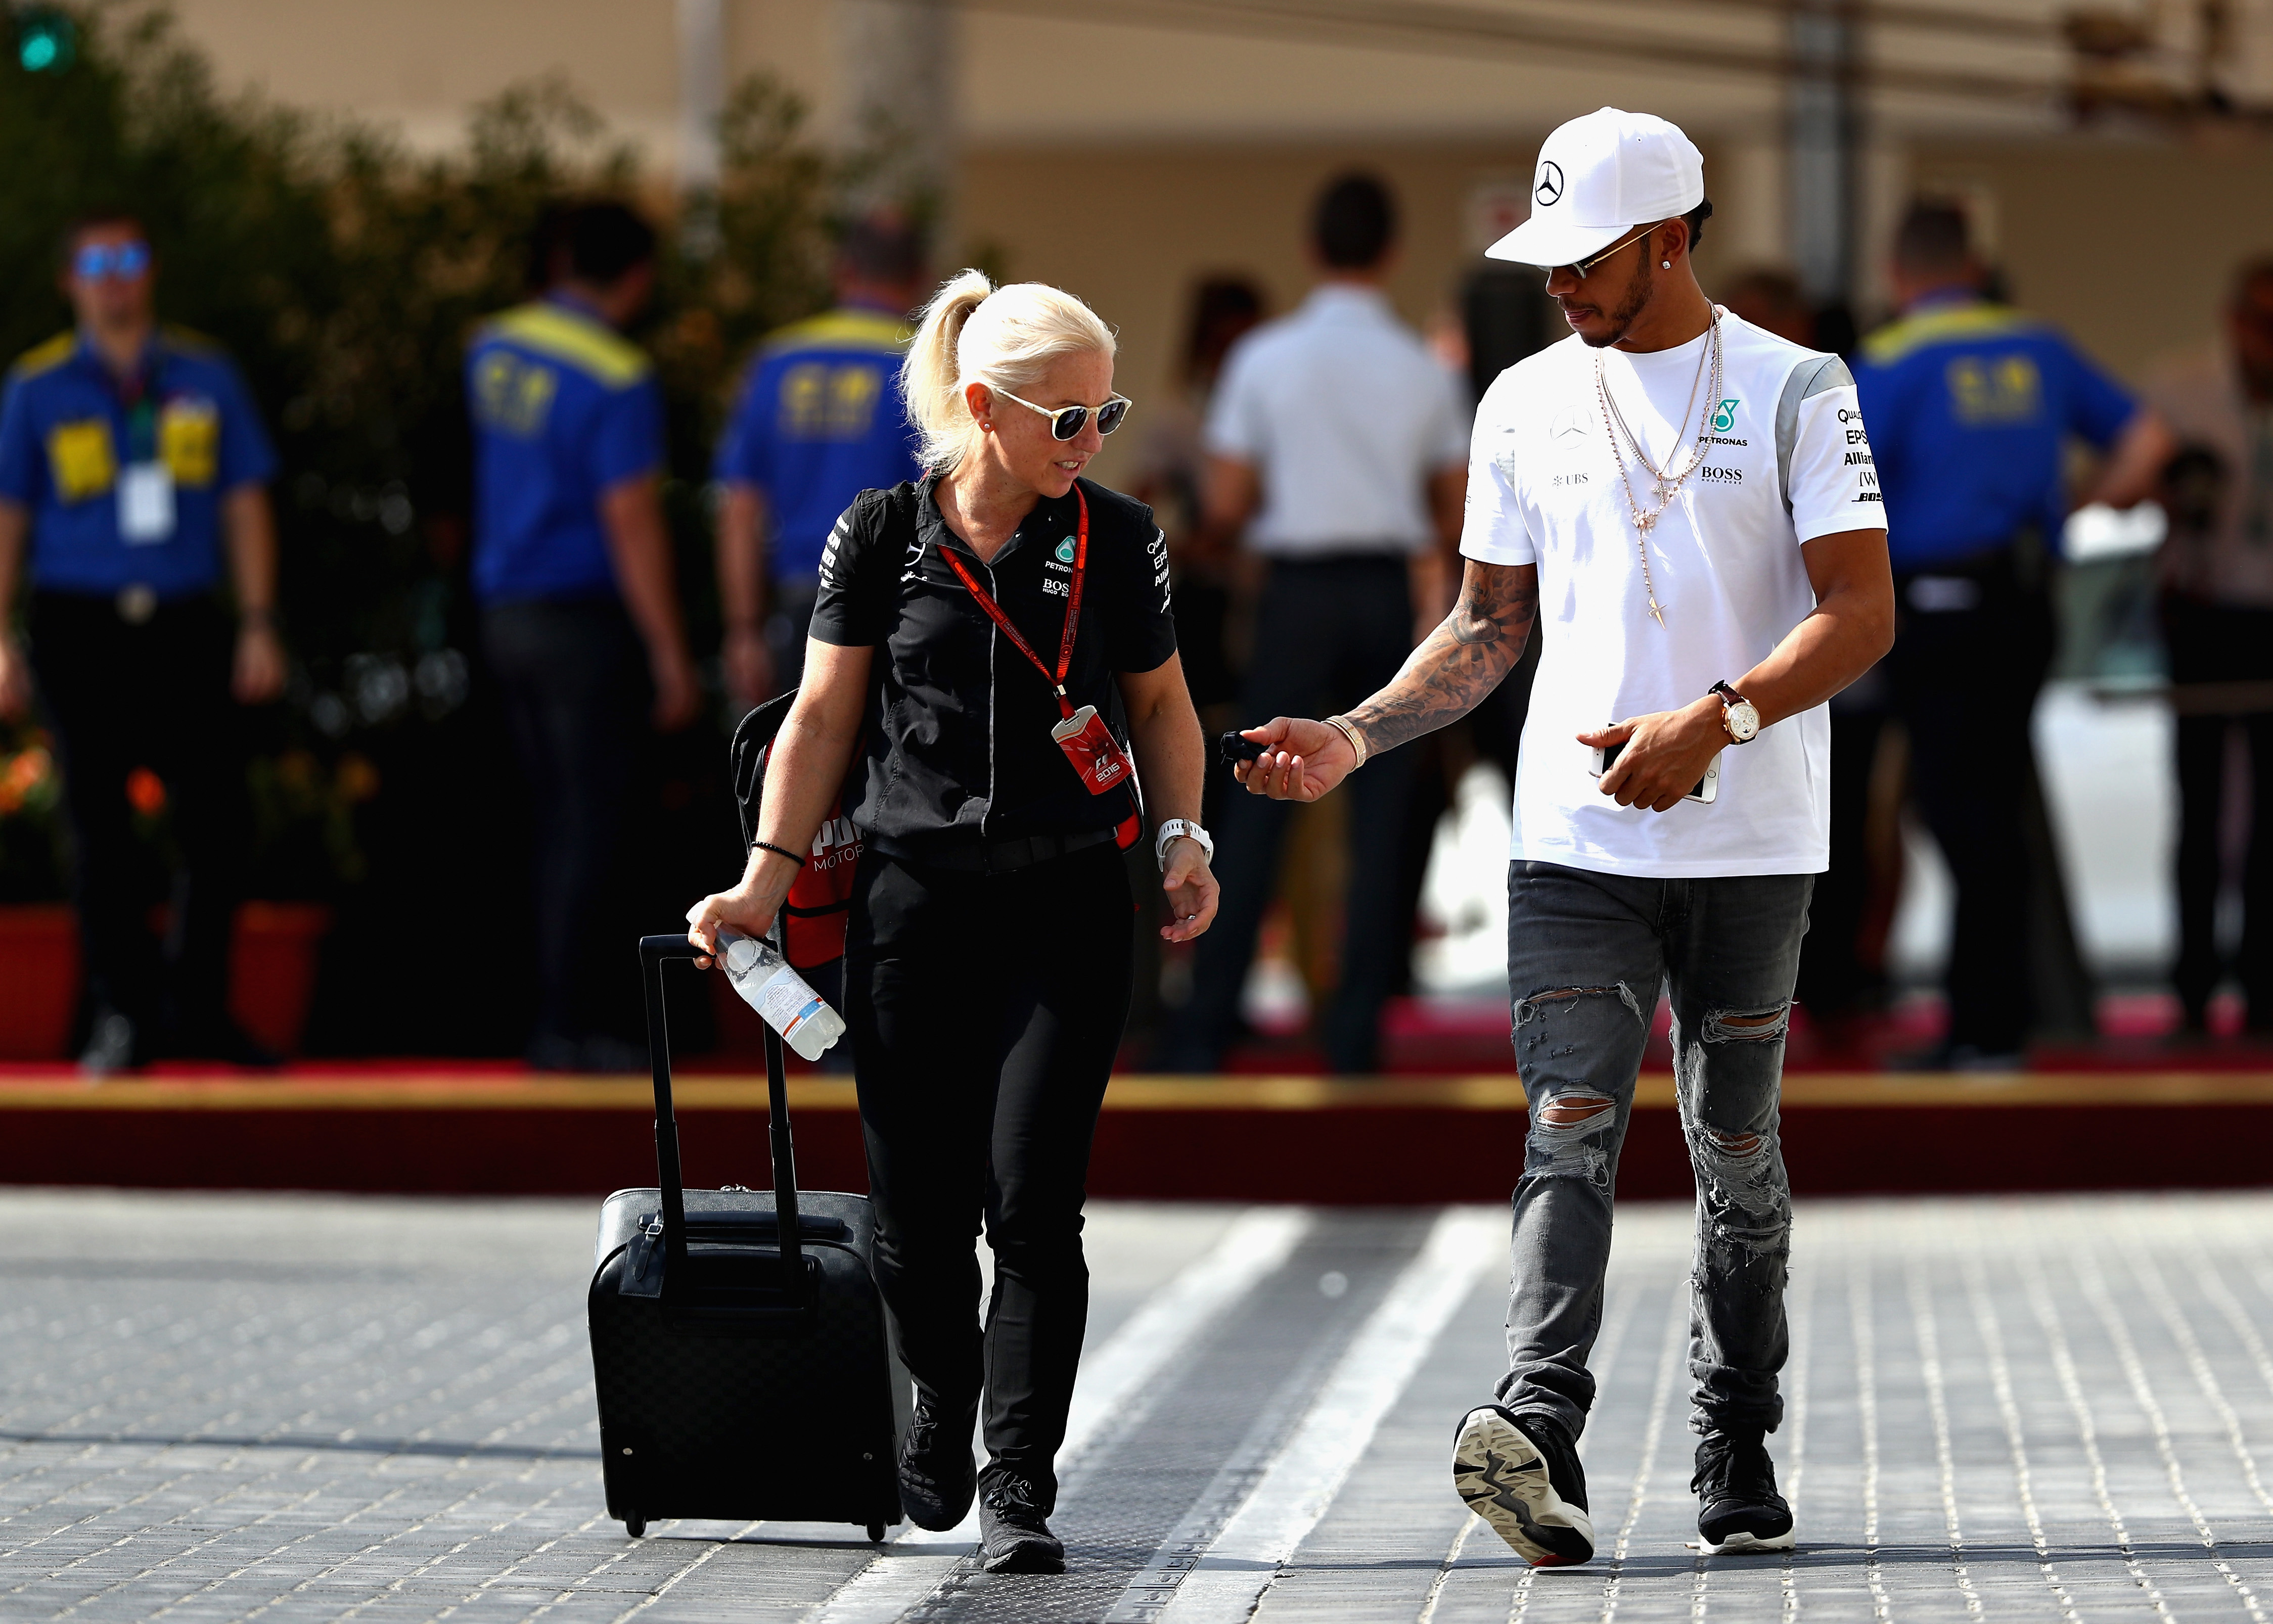 Angela Cullen (left) and Lewis Hamilton at the 2016 Abu Dhabi Grand Prix.